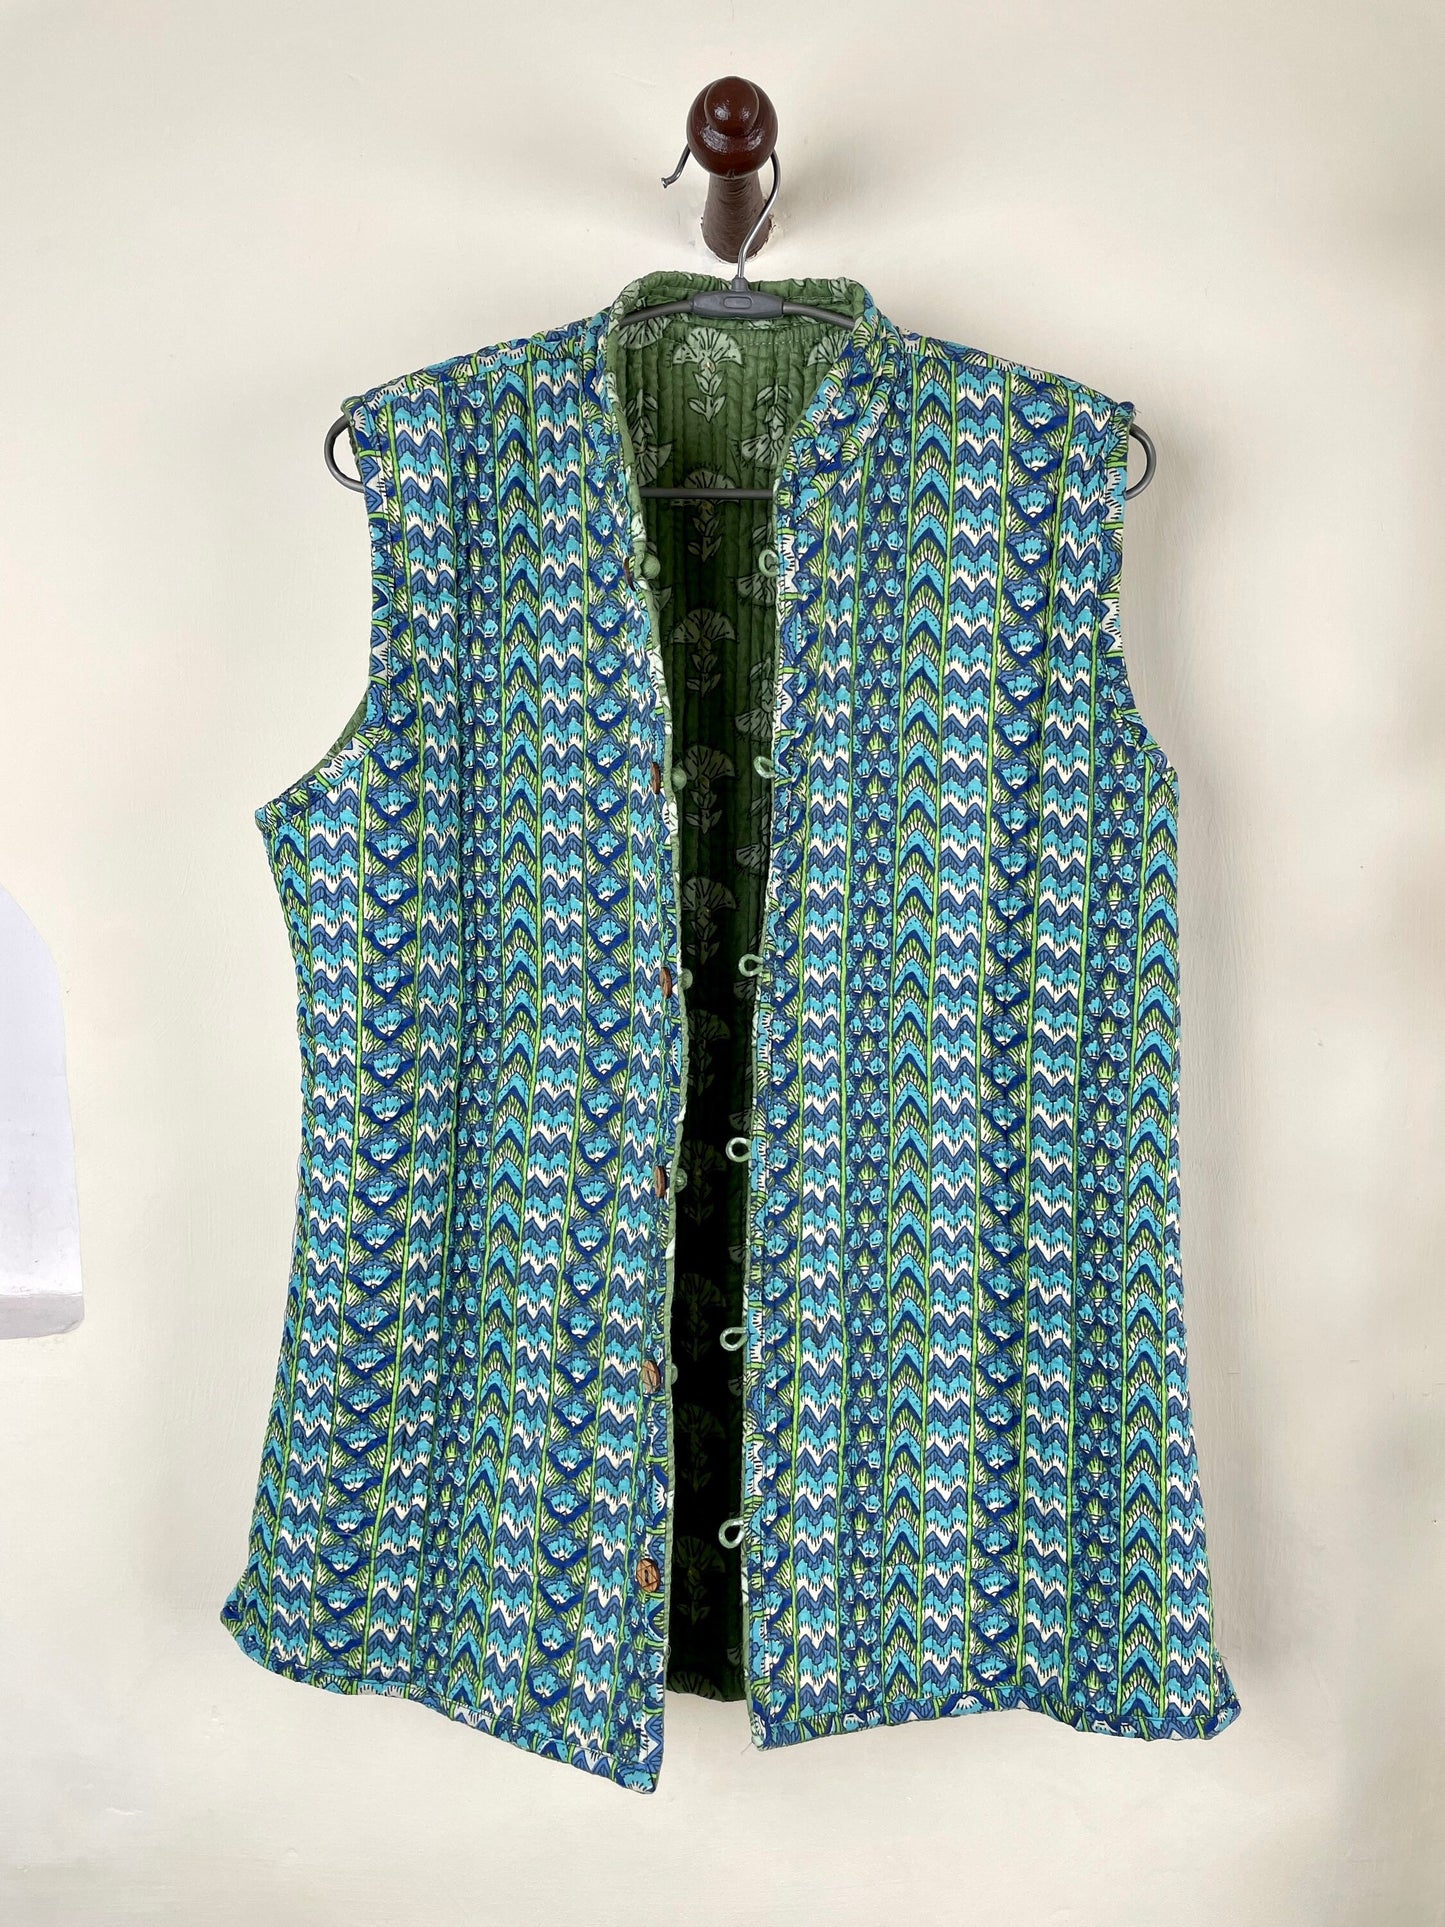 Indian Handmade Quilted Cotton Sleeveless Jacket Green & Blue Stylish Women's Coat, Reversible Jacket for Her